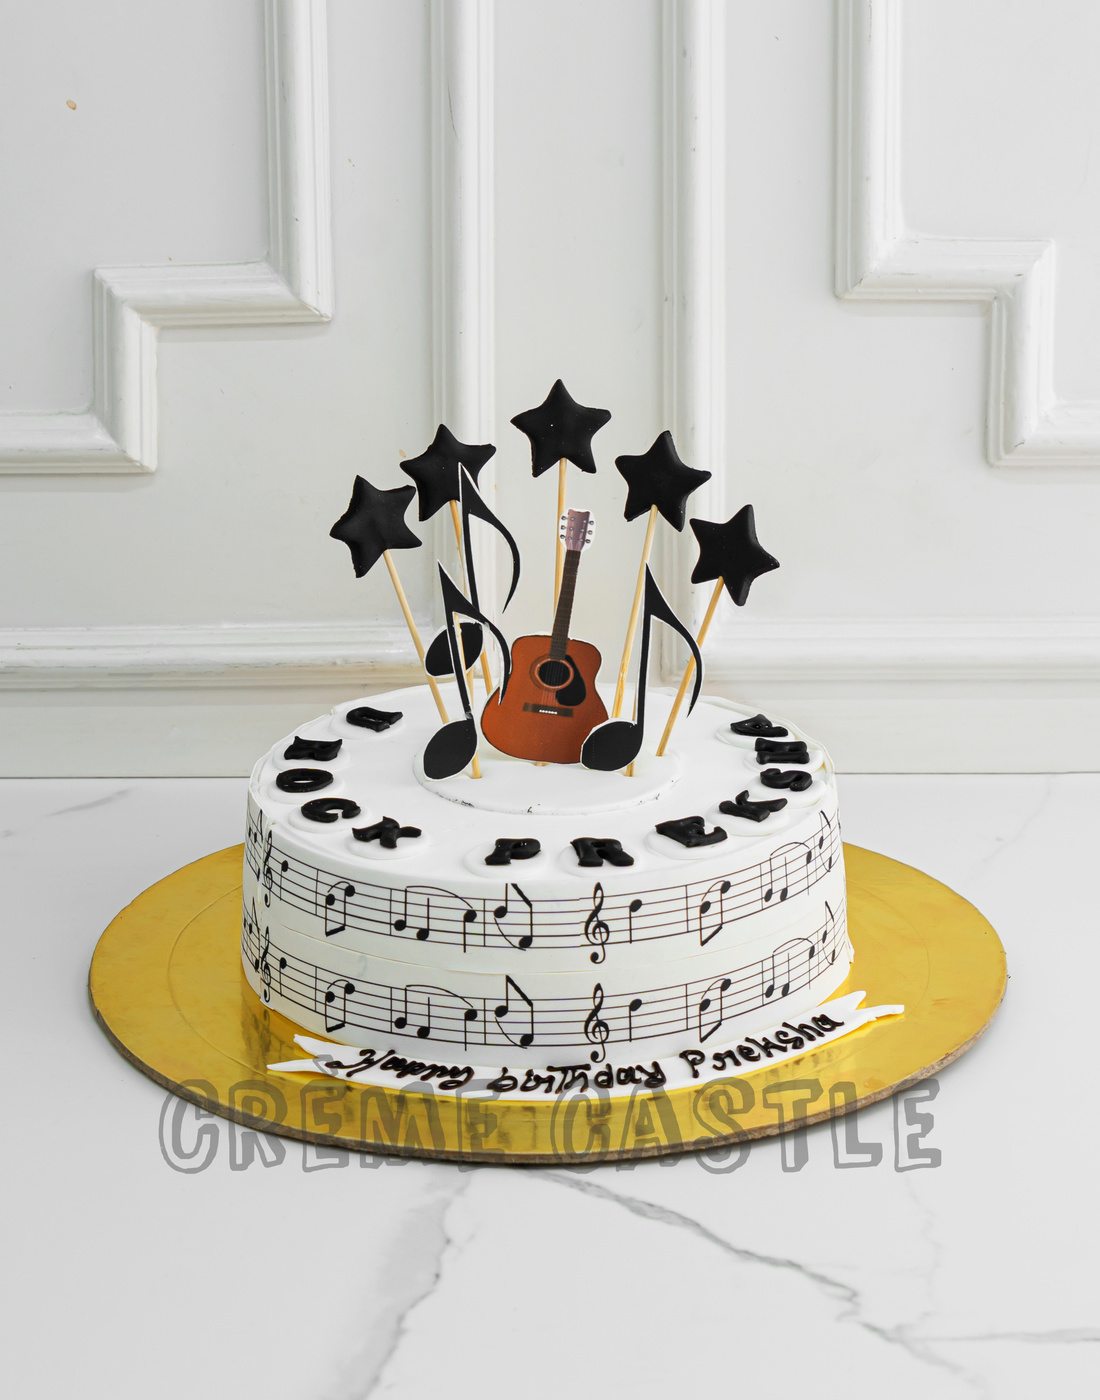 X 上的 Chocofeast by Sunita：「”food for the soul” A Chocolate Truffle cake  draped in fondant ,with 3d guitar and other accents to celbrate the  birthday of Music Lover Surbhi！ #chocofeast #mumbai #bestcakesinmumbai #